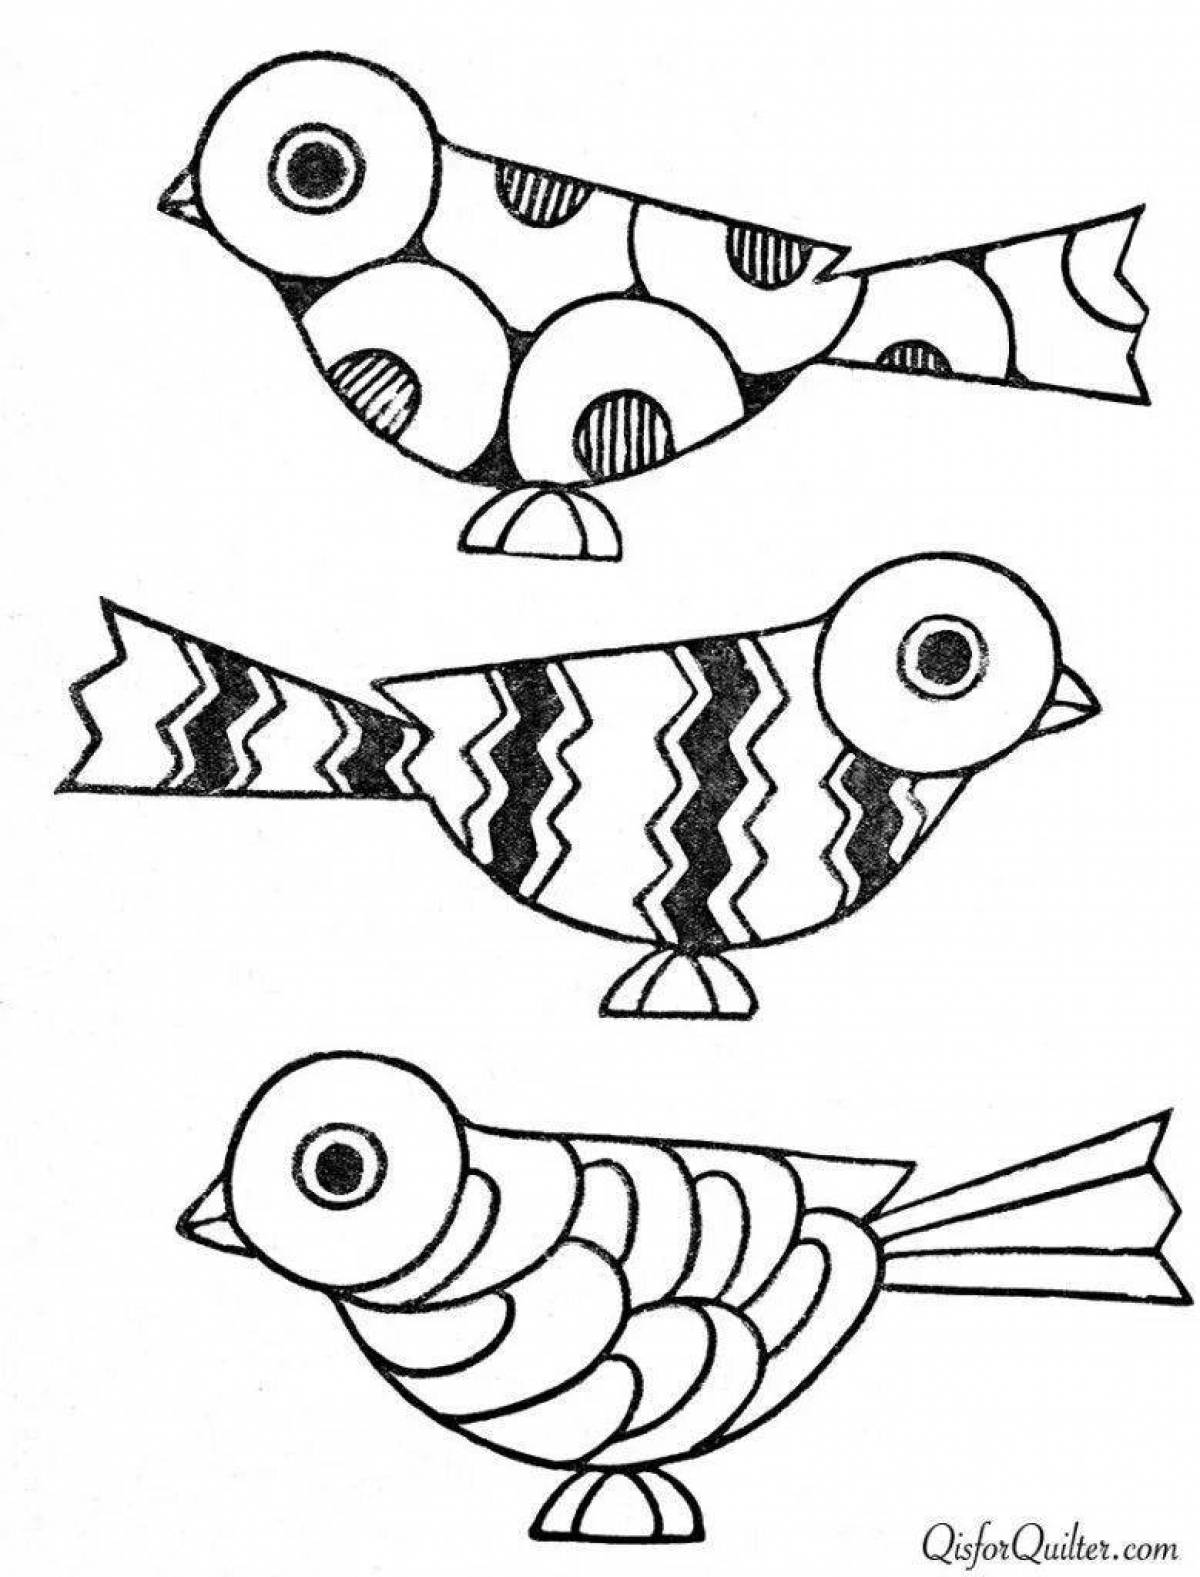 Fun whistle coloring book for preschoolers